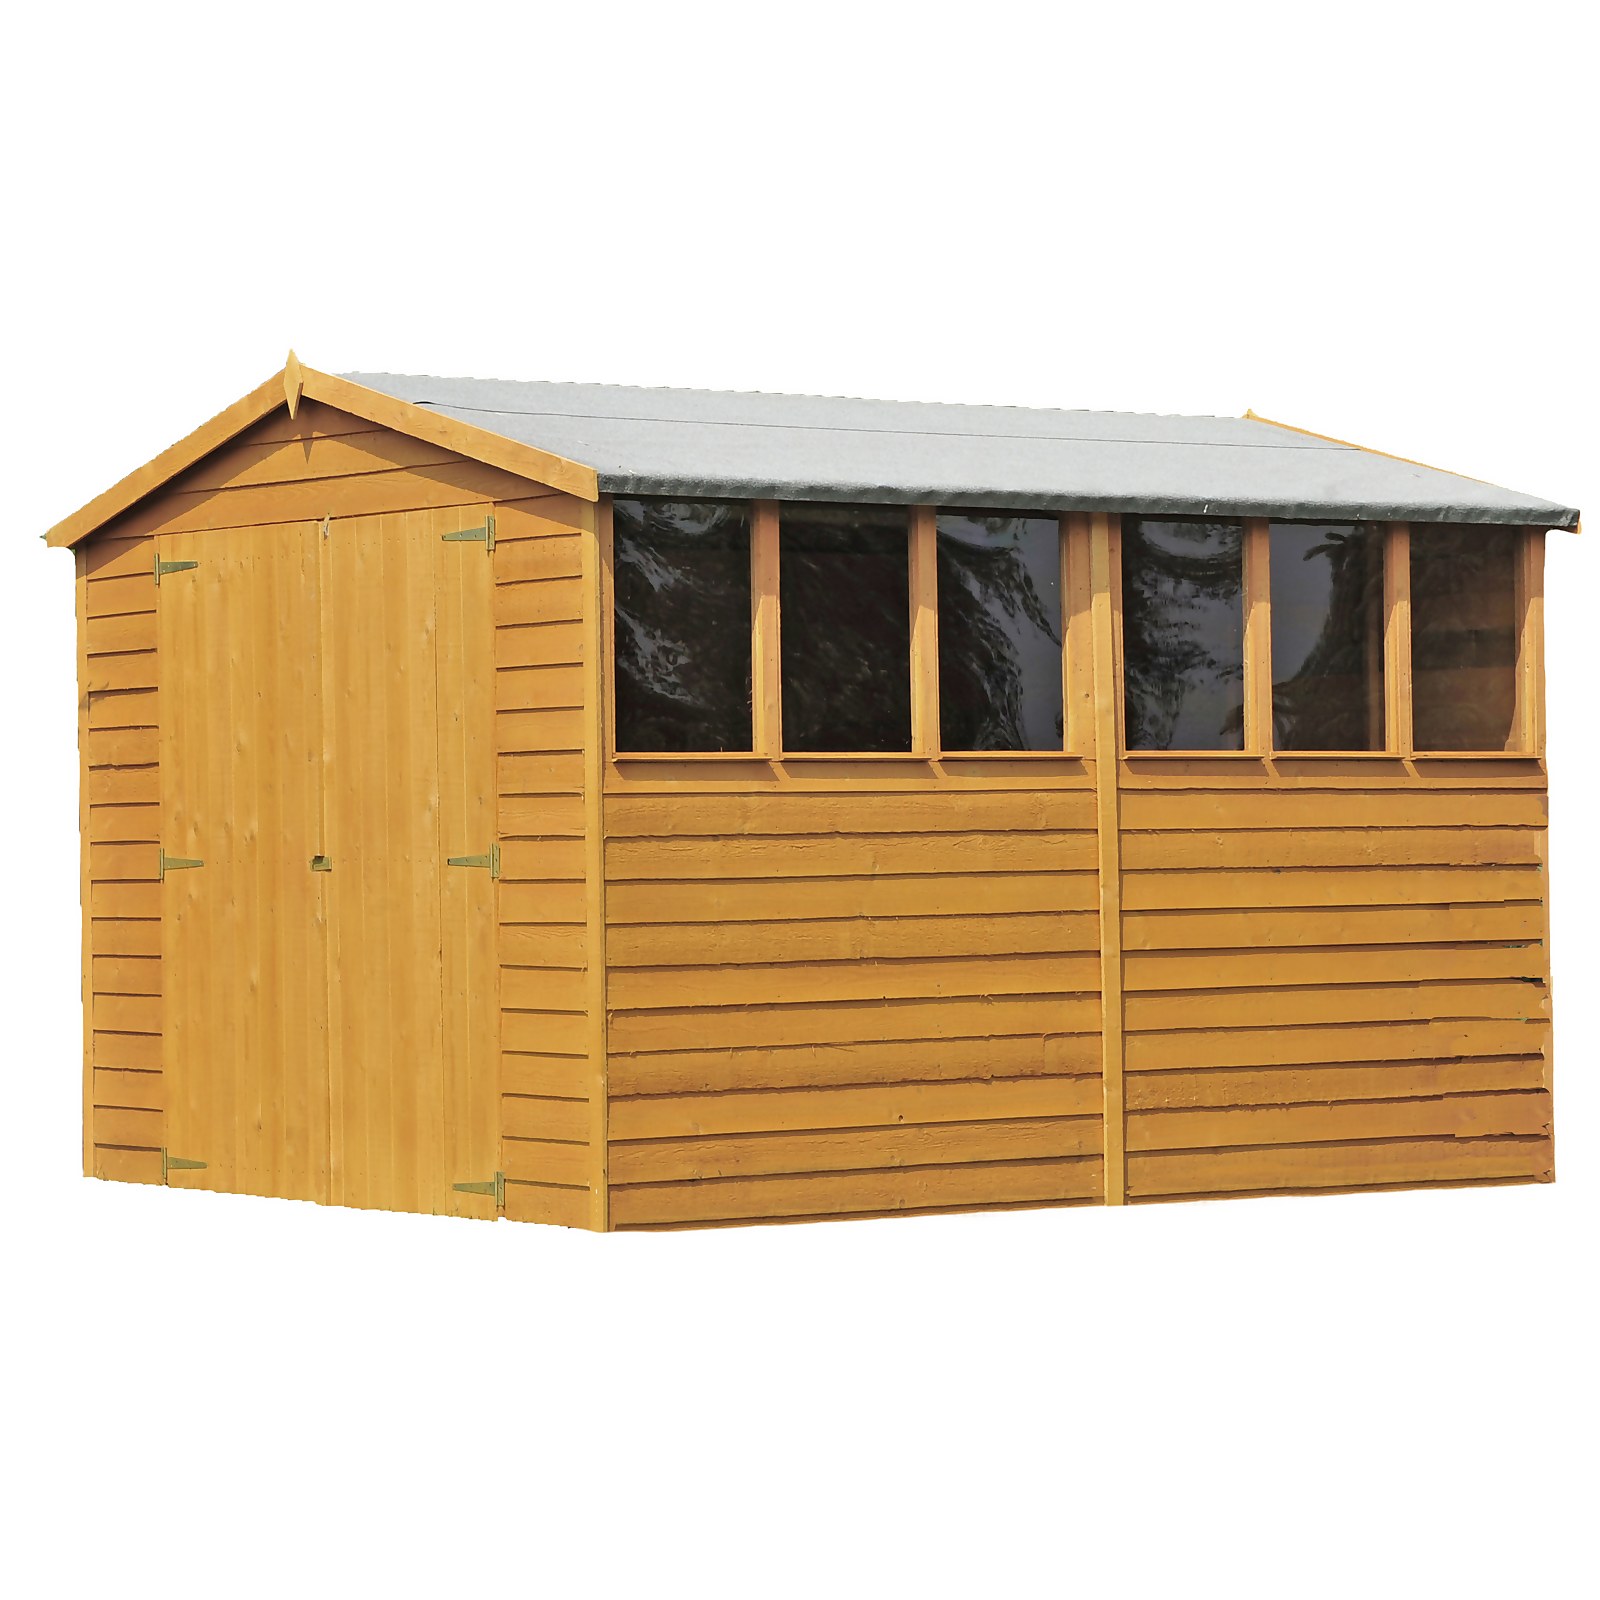 Shire 10 x 10ft Double Door Overlap Garden Shed - Including Installation